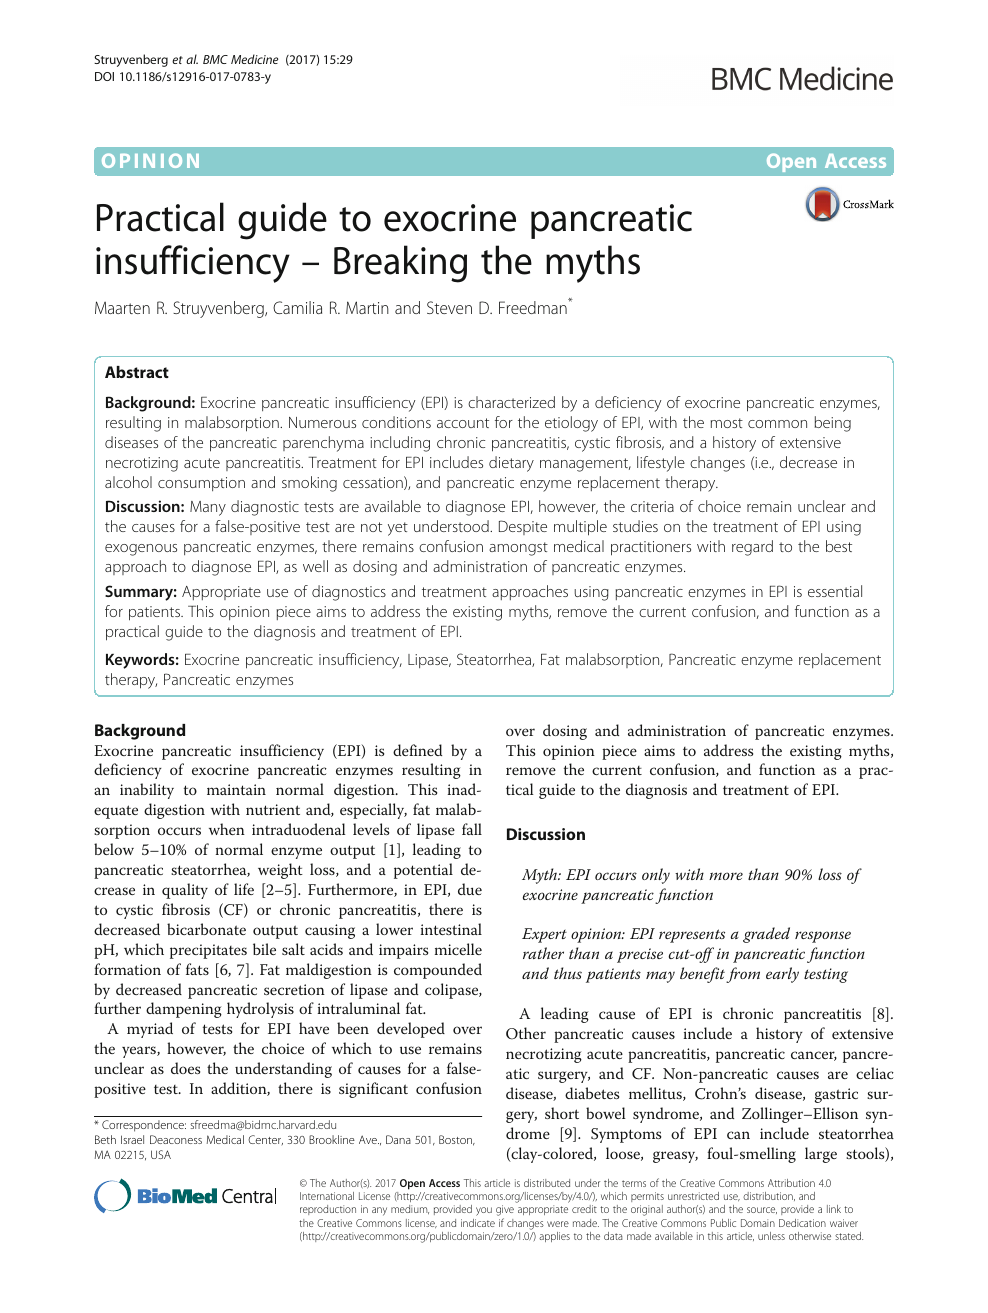 Practical Guide To Exocrine Pancreatic Insufficiency Breaking The Myths Topic Of Research Paper In Clinical Medicine Download Scholarly Article Pdf And Read For Free On Cyberleninka Open Science Hub